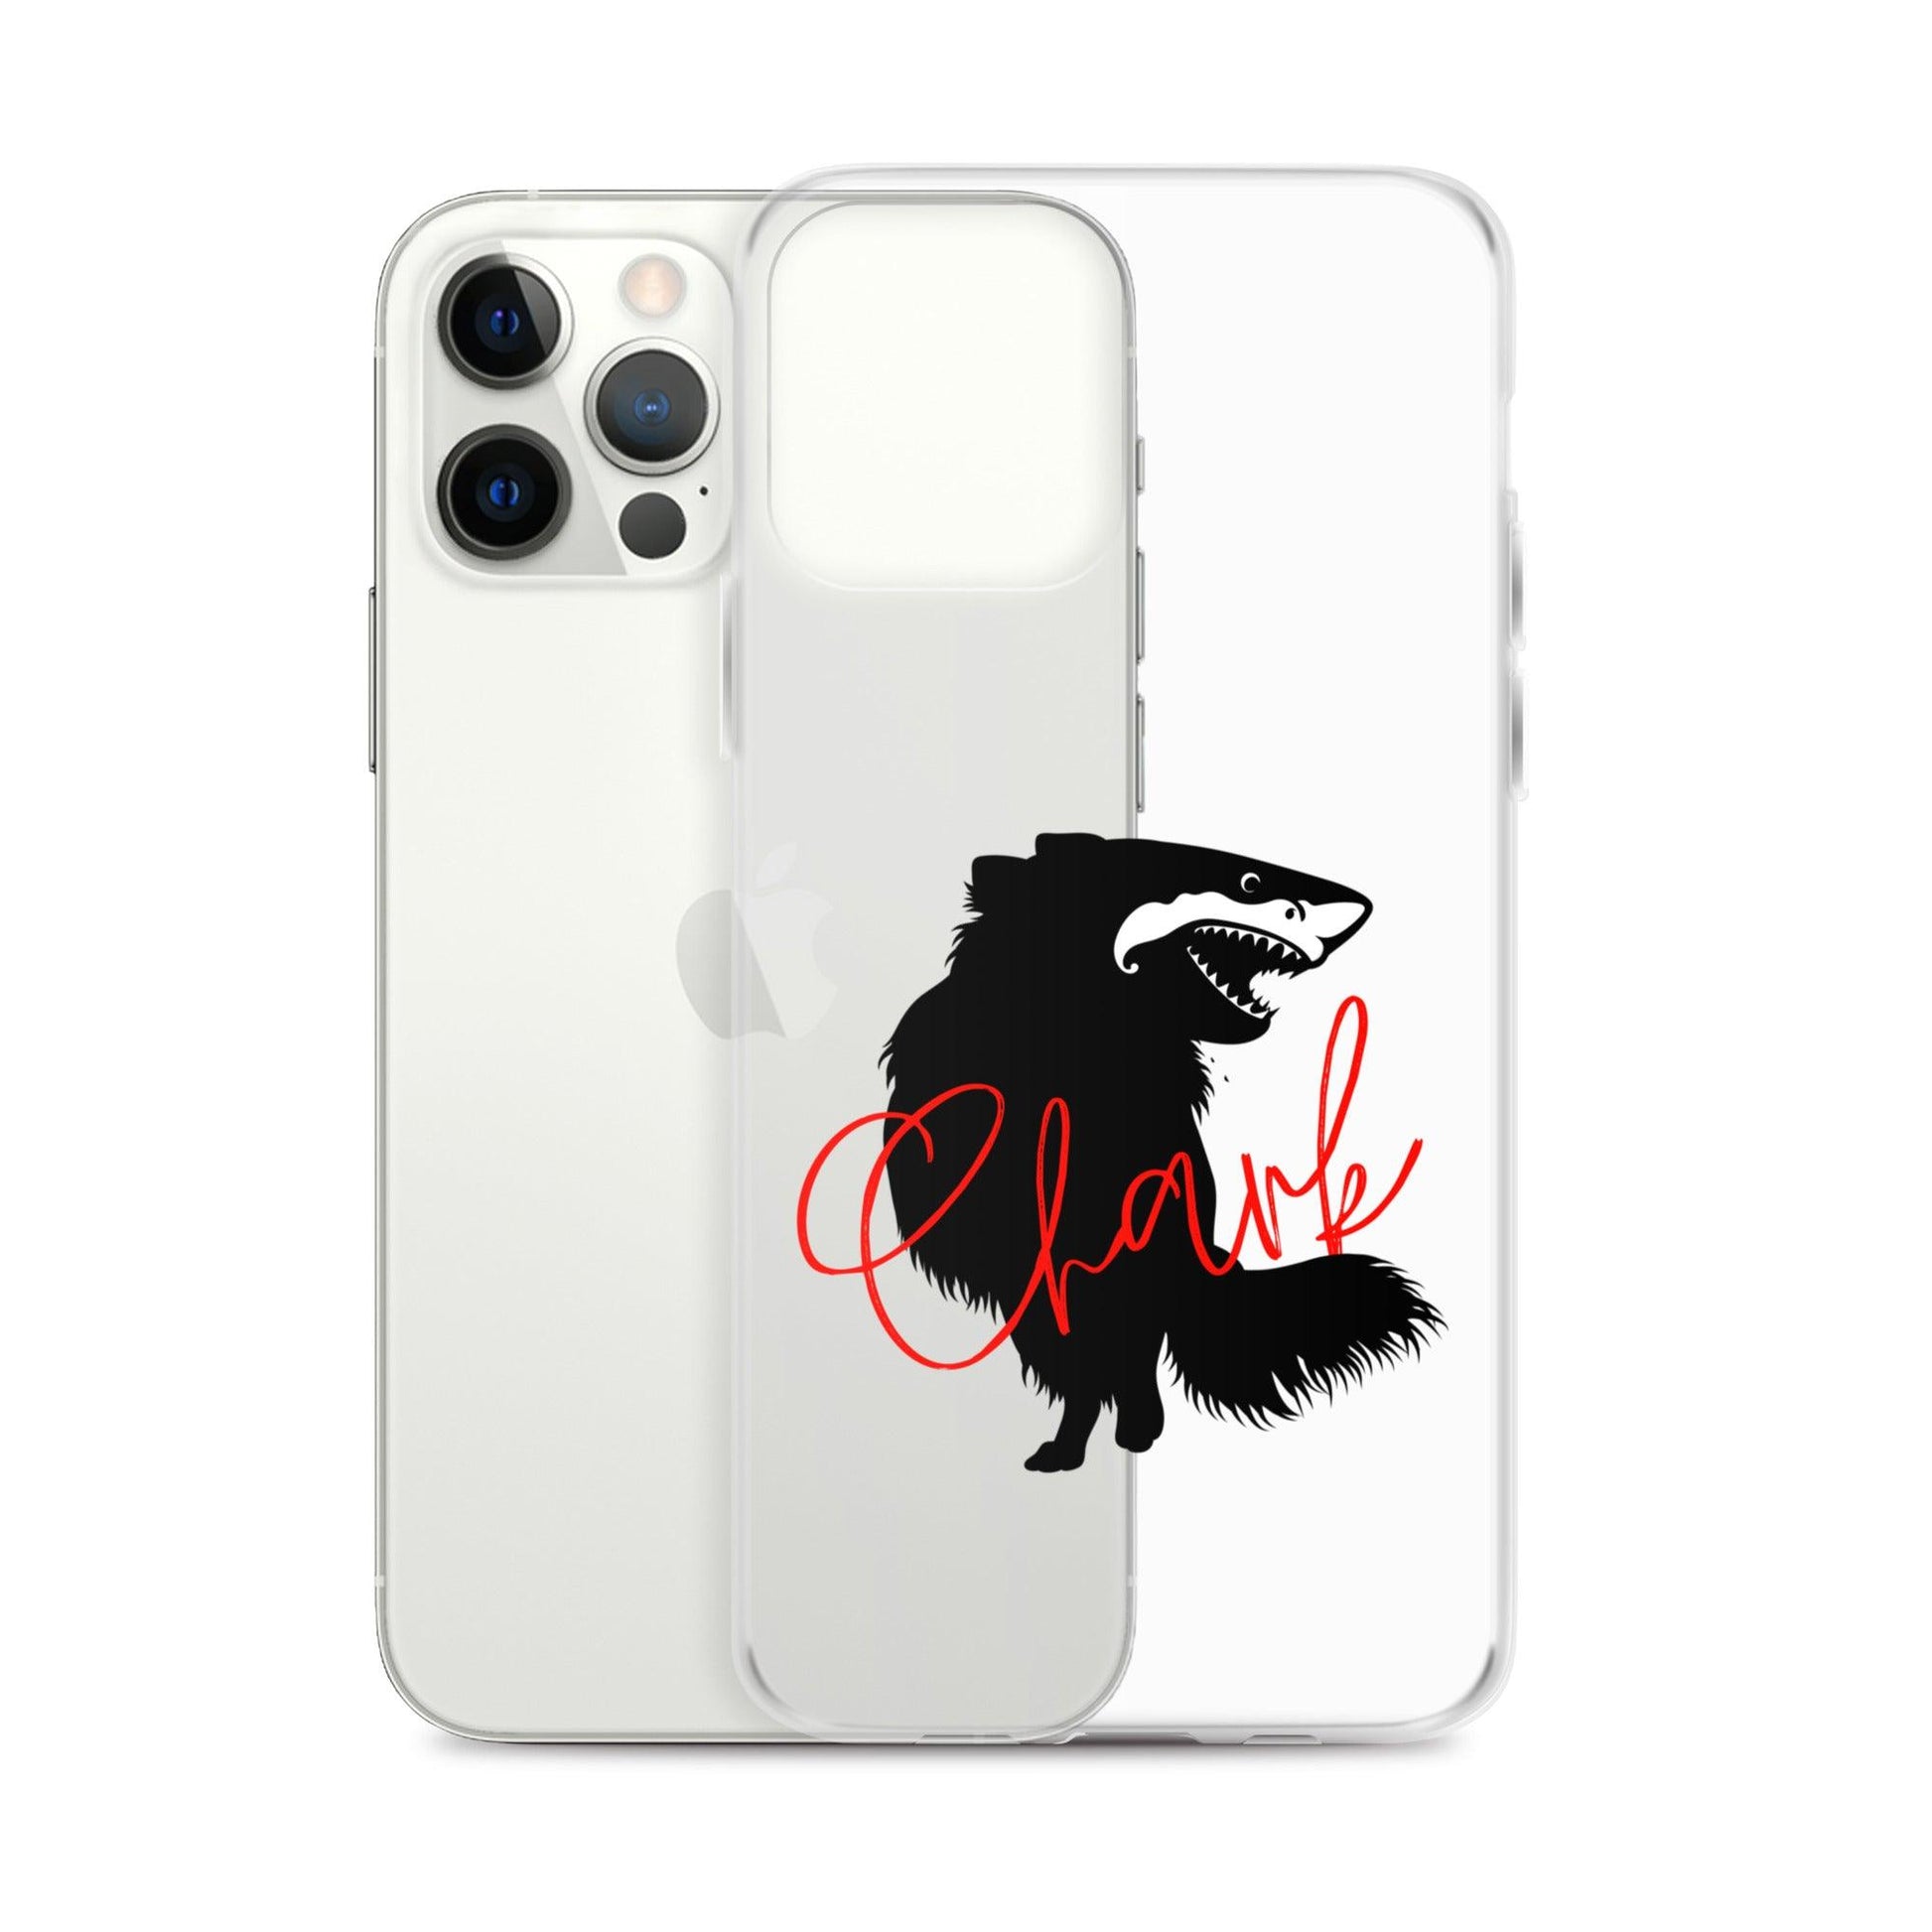 Chihuahua + Shark = Chark Clear iPhone case with the black silhouette of a longhaired chihuahua with the face of a great white shark - mouth open to show off jaws lined with lots of sharp white teeth. The word "Chark" is artfully placed in red cursive font over the image. For trendy chi lovers. iPhone 12 pro max case.